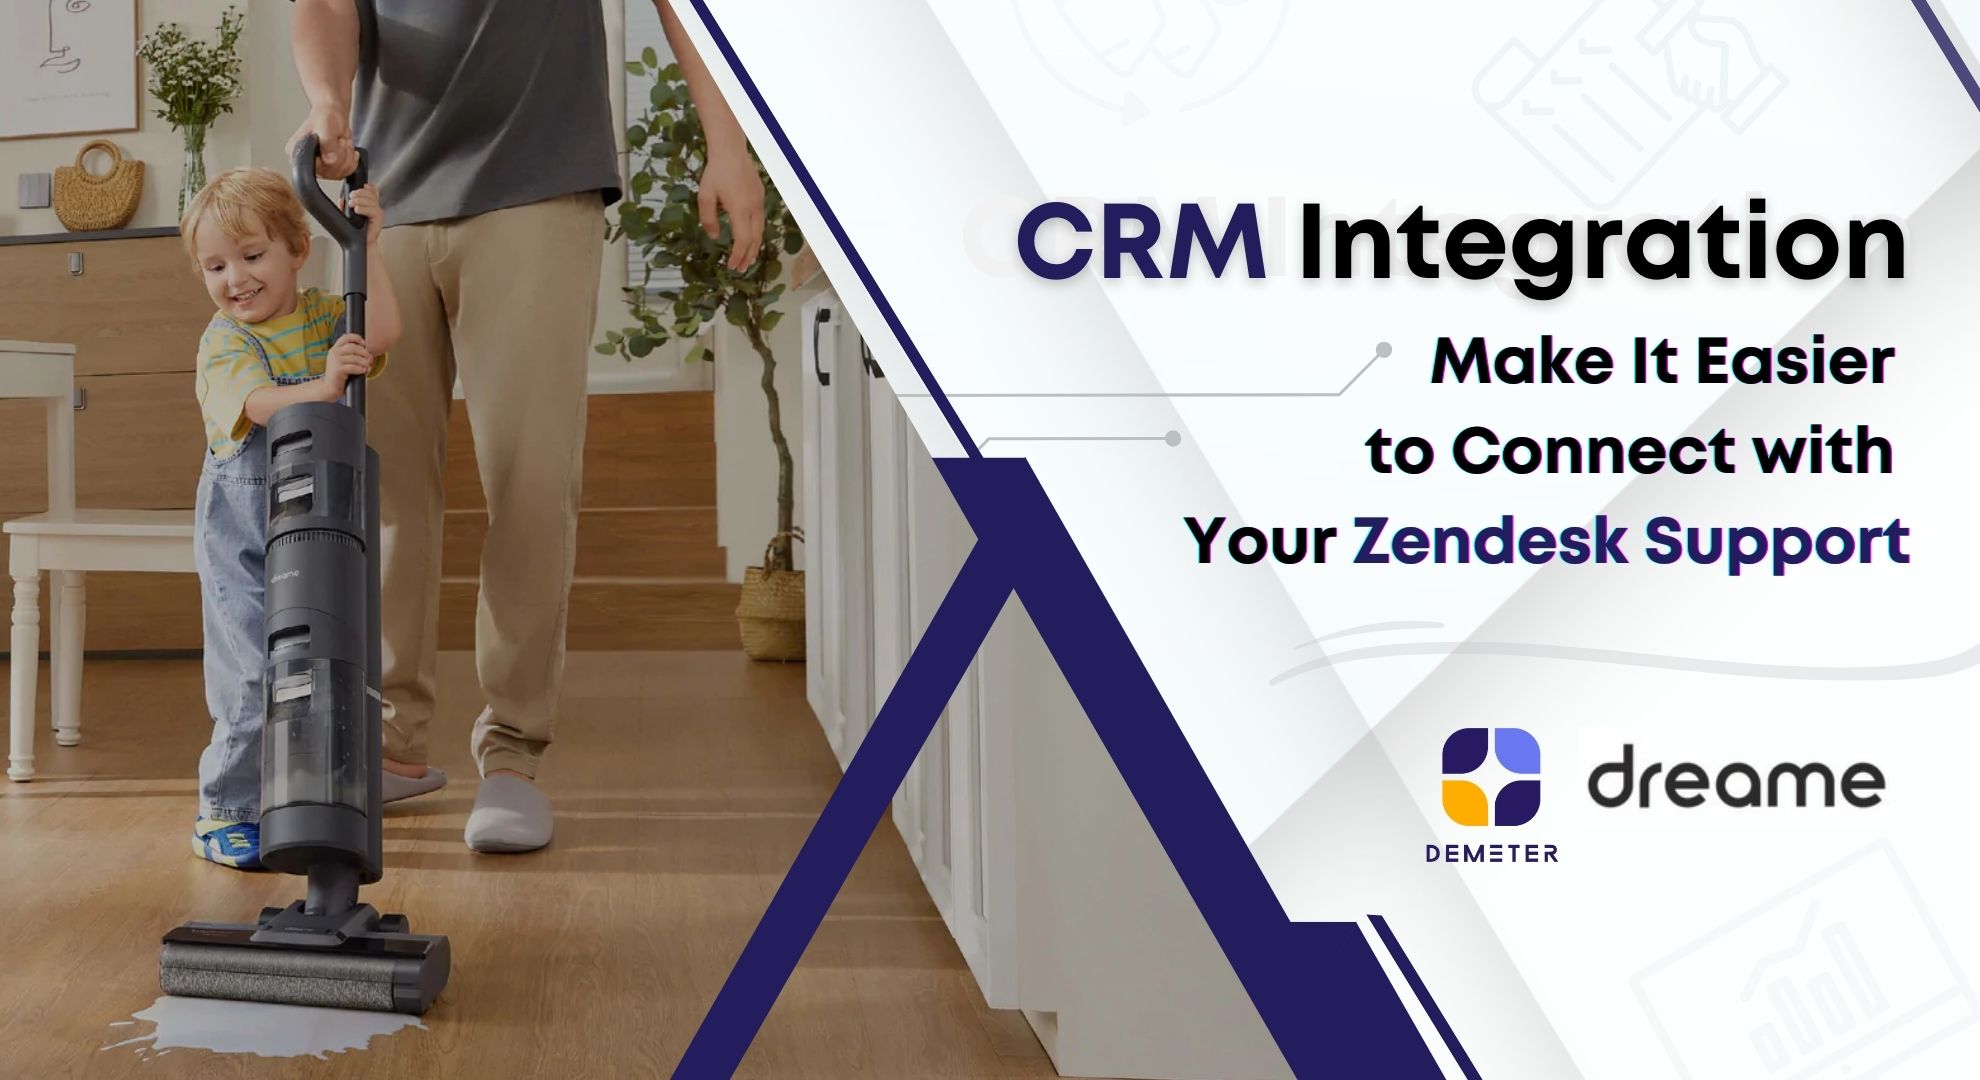 CRM Integration with Zendesk Support